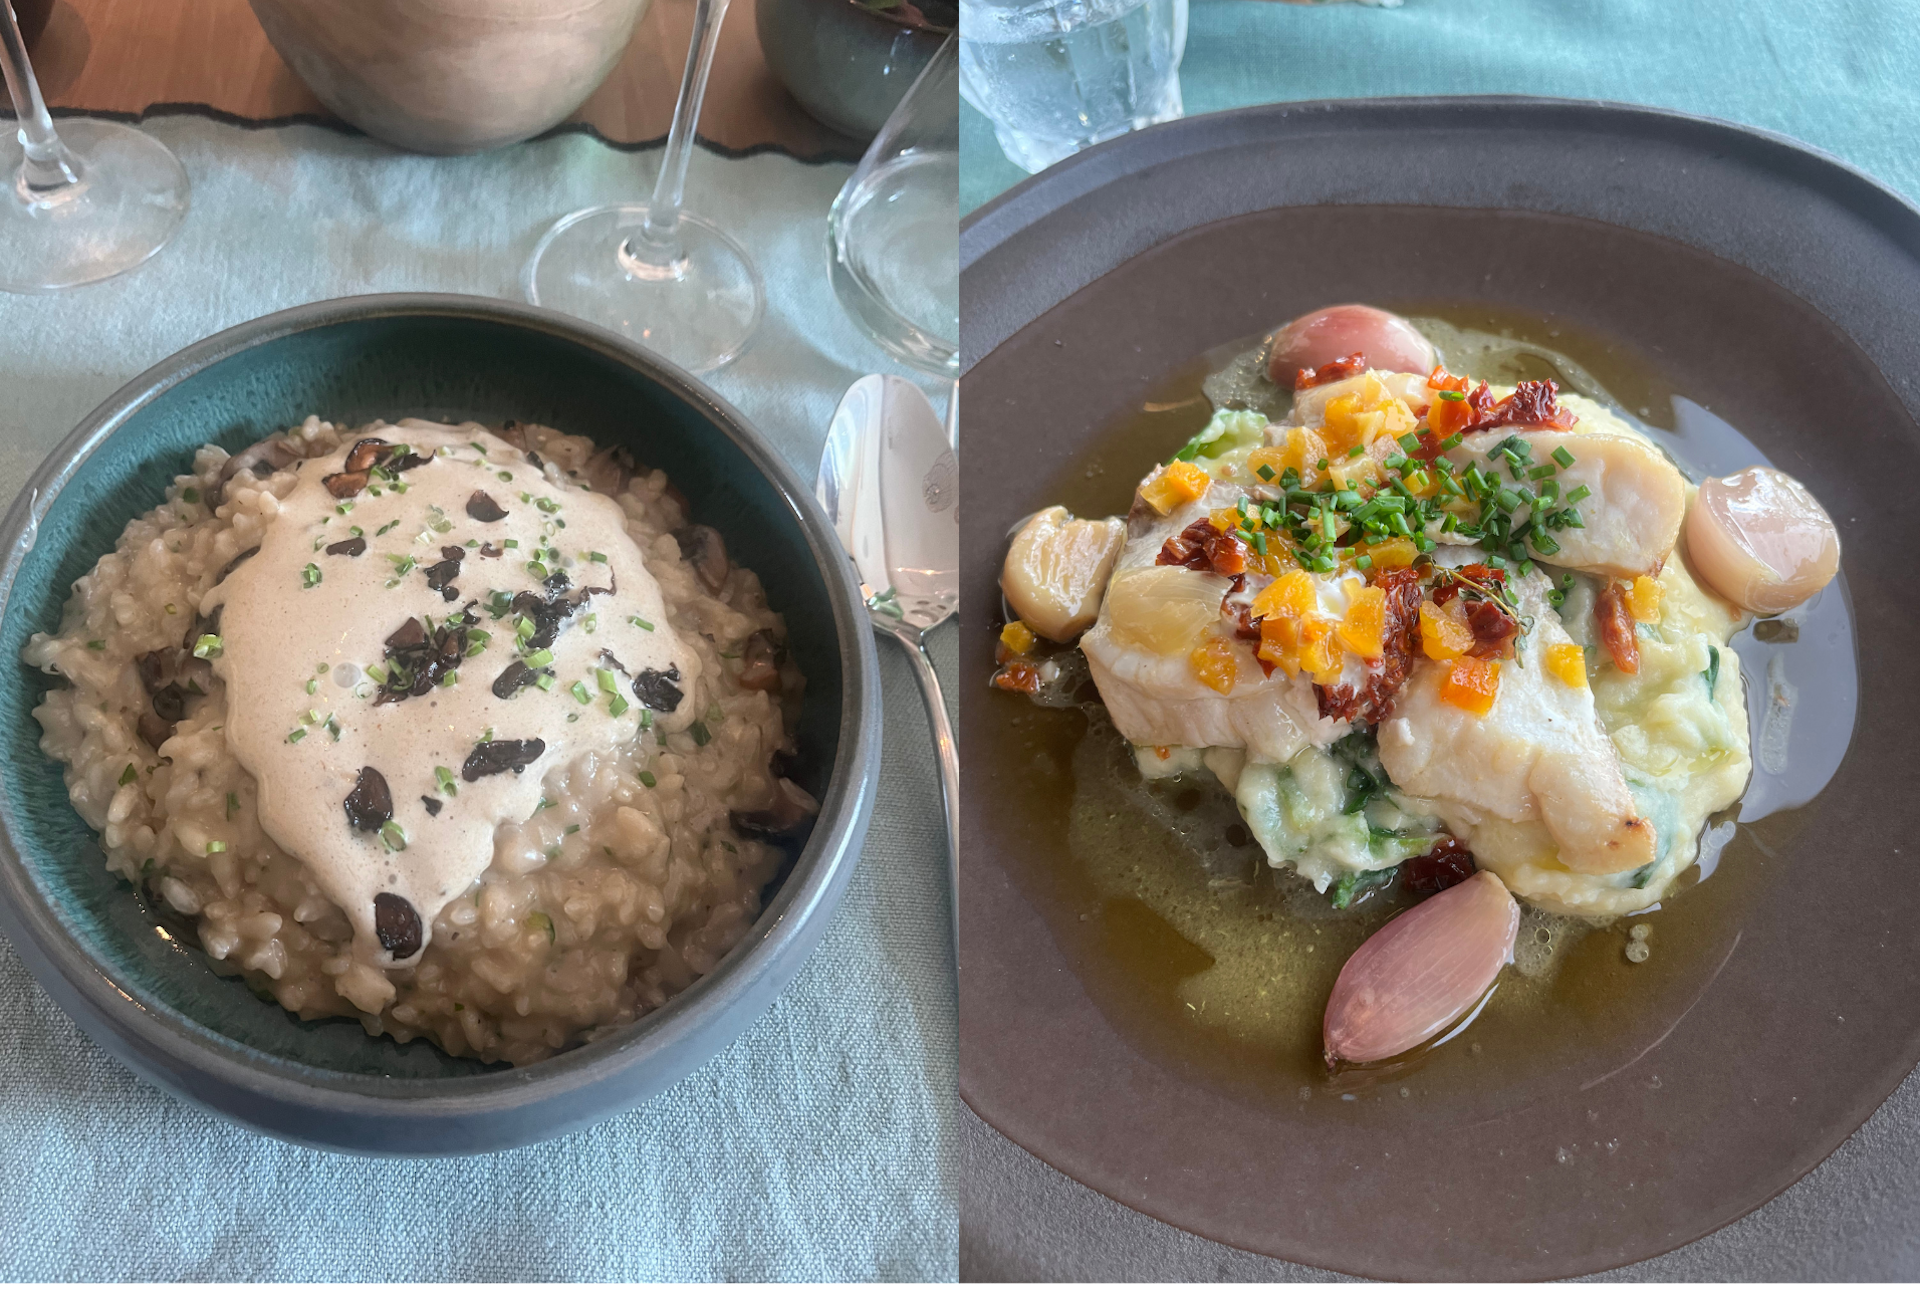 A collage image - mushroom risotto on the left and a fish dish on the right